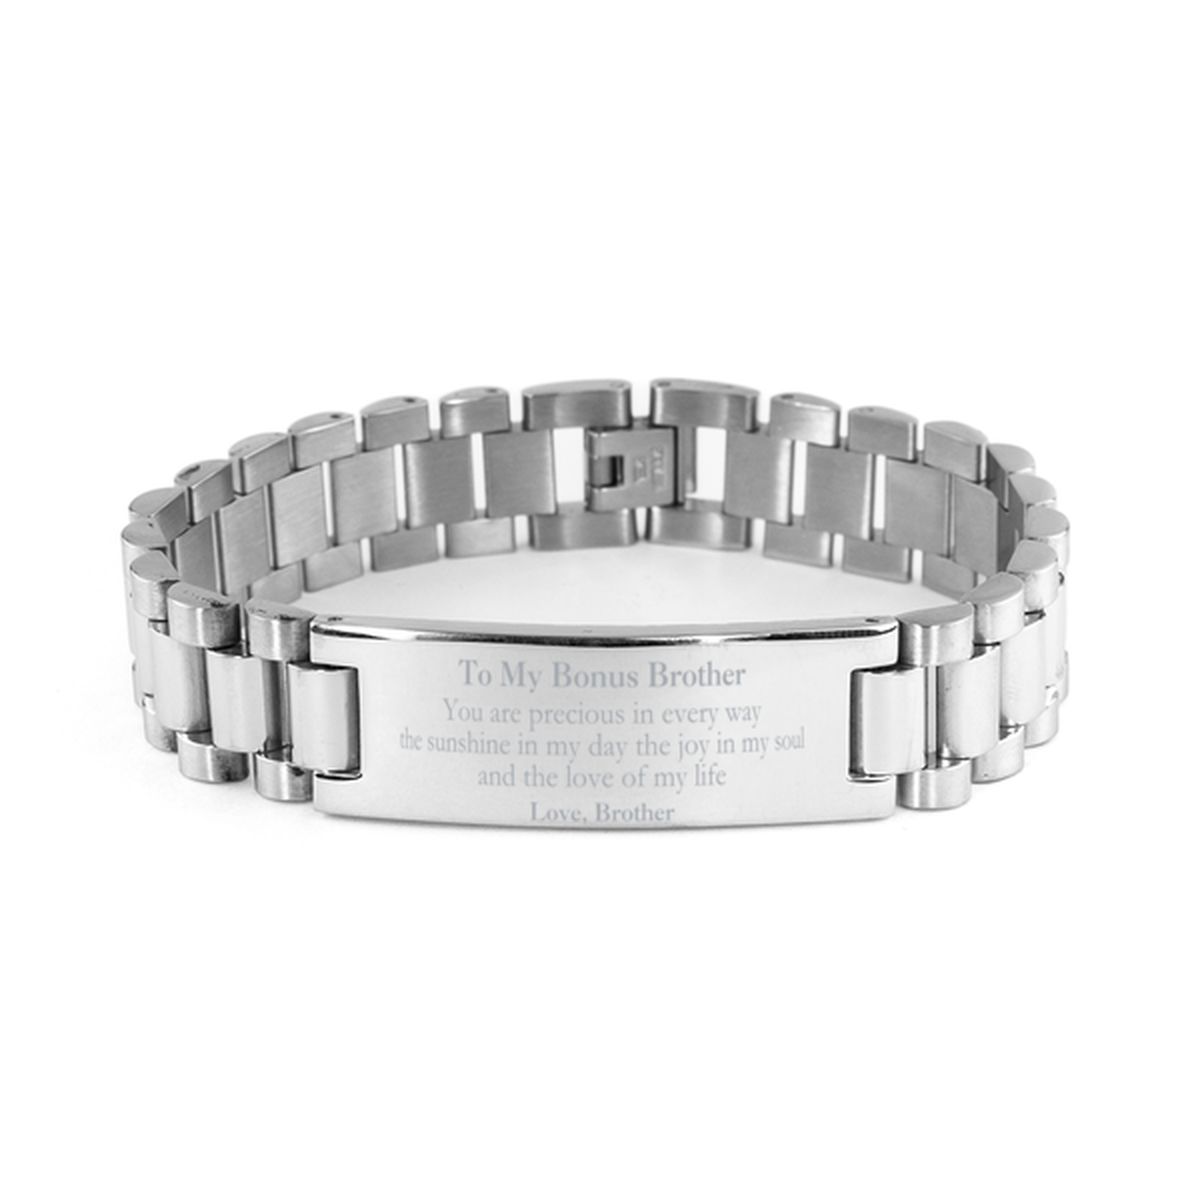 Graduation Gifts for Bonus Brother Ladder Stainless Steel Bracelet Present from Brother, Christmas Bonus Brother Birthday Gifts Bonus Brother You are precious in every way the sunshine in my day. Love, Brother